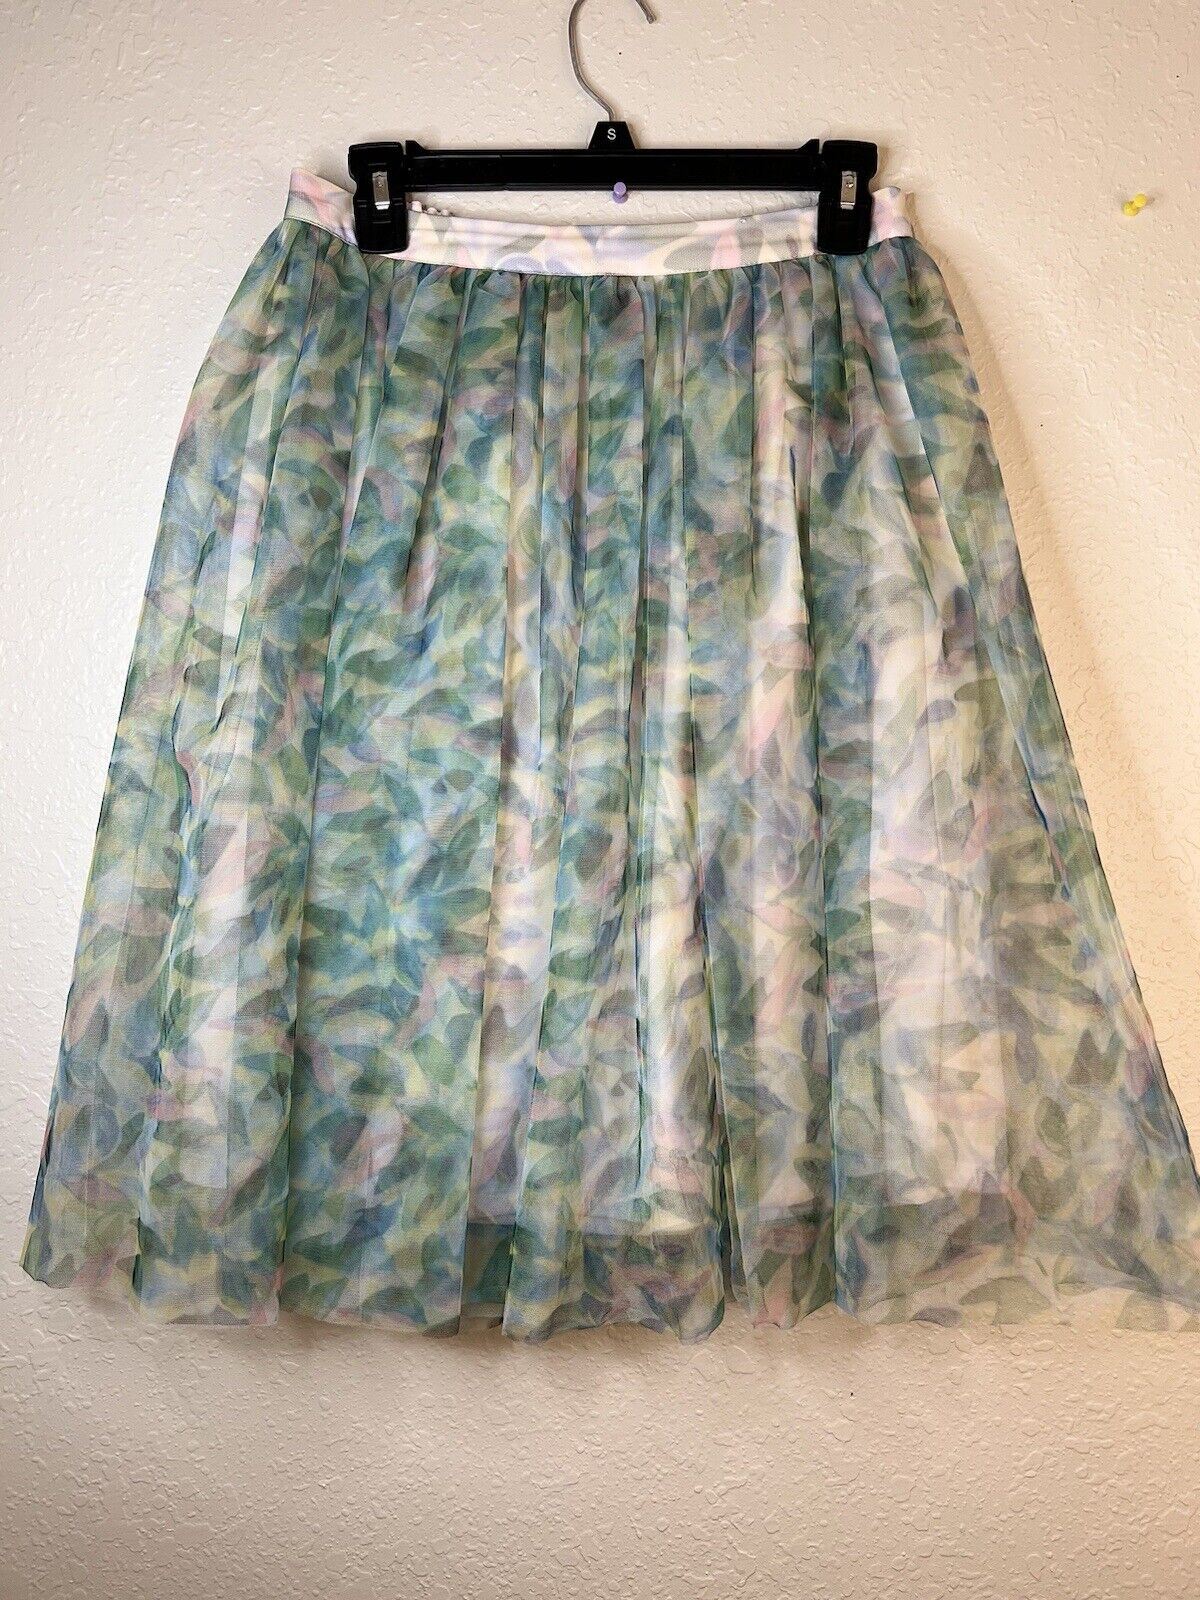 Lauren Conrad Women’s Small Disney Cinderella Tulle Skirt A Line Whimsical Lined